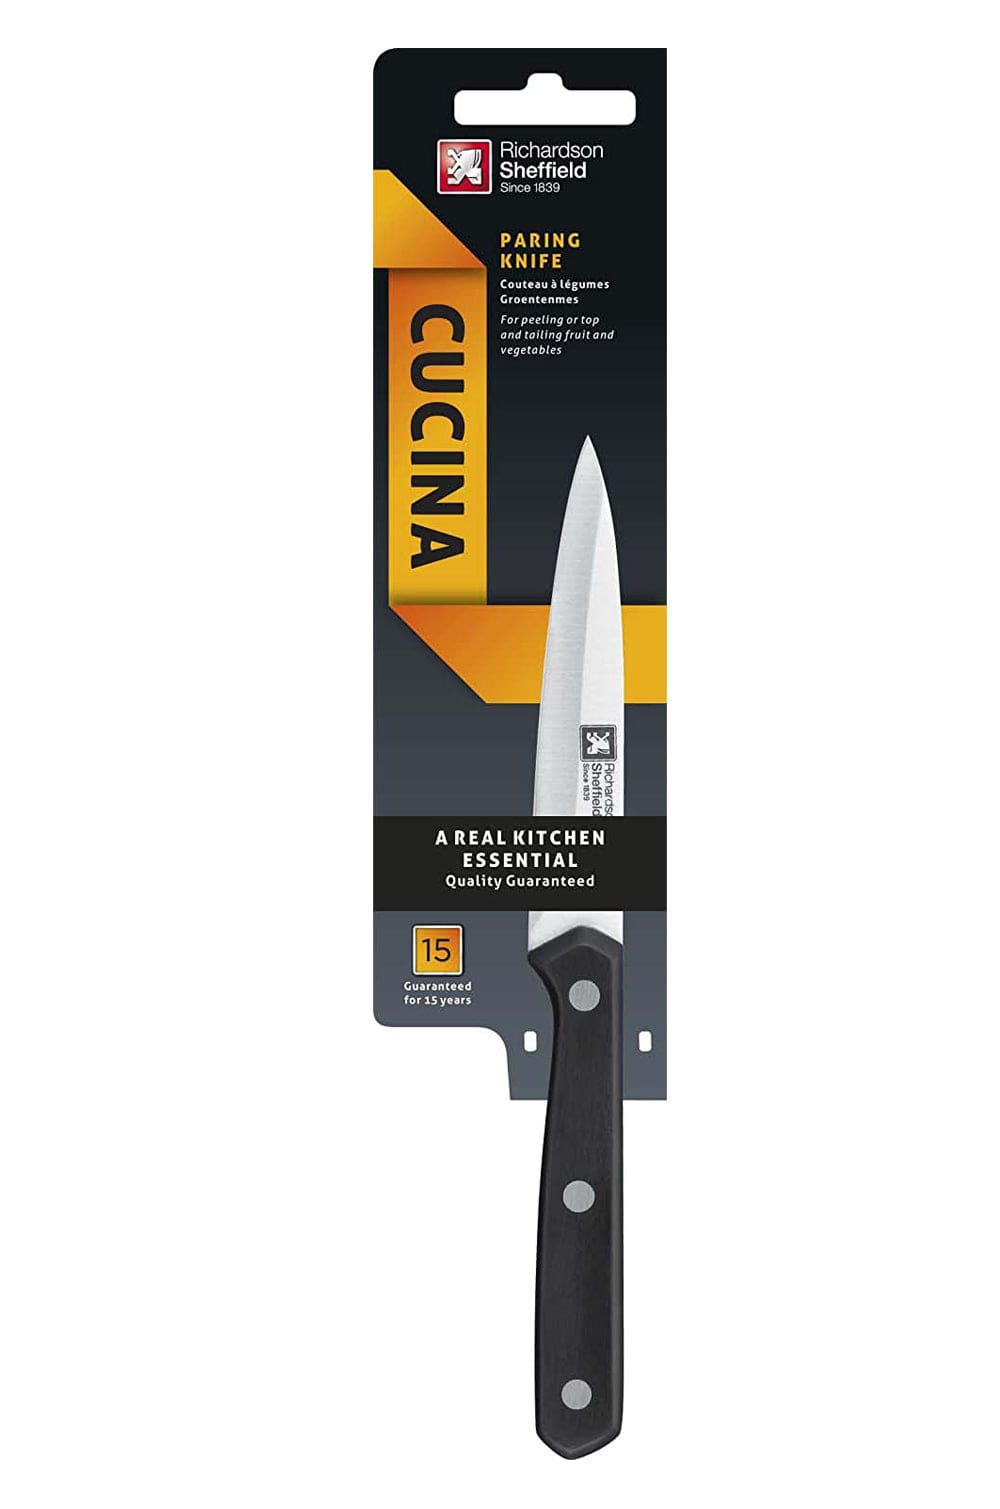 Richardson Sheffield Cucina Stainless Steel Cook's Knife - 15 cm